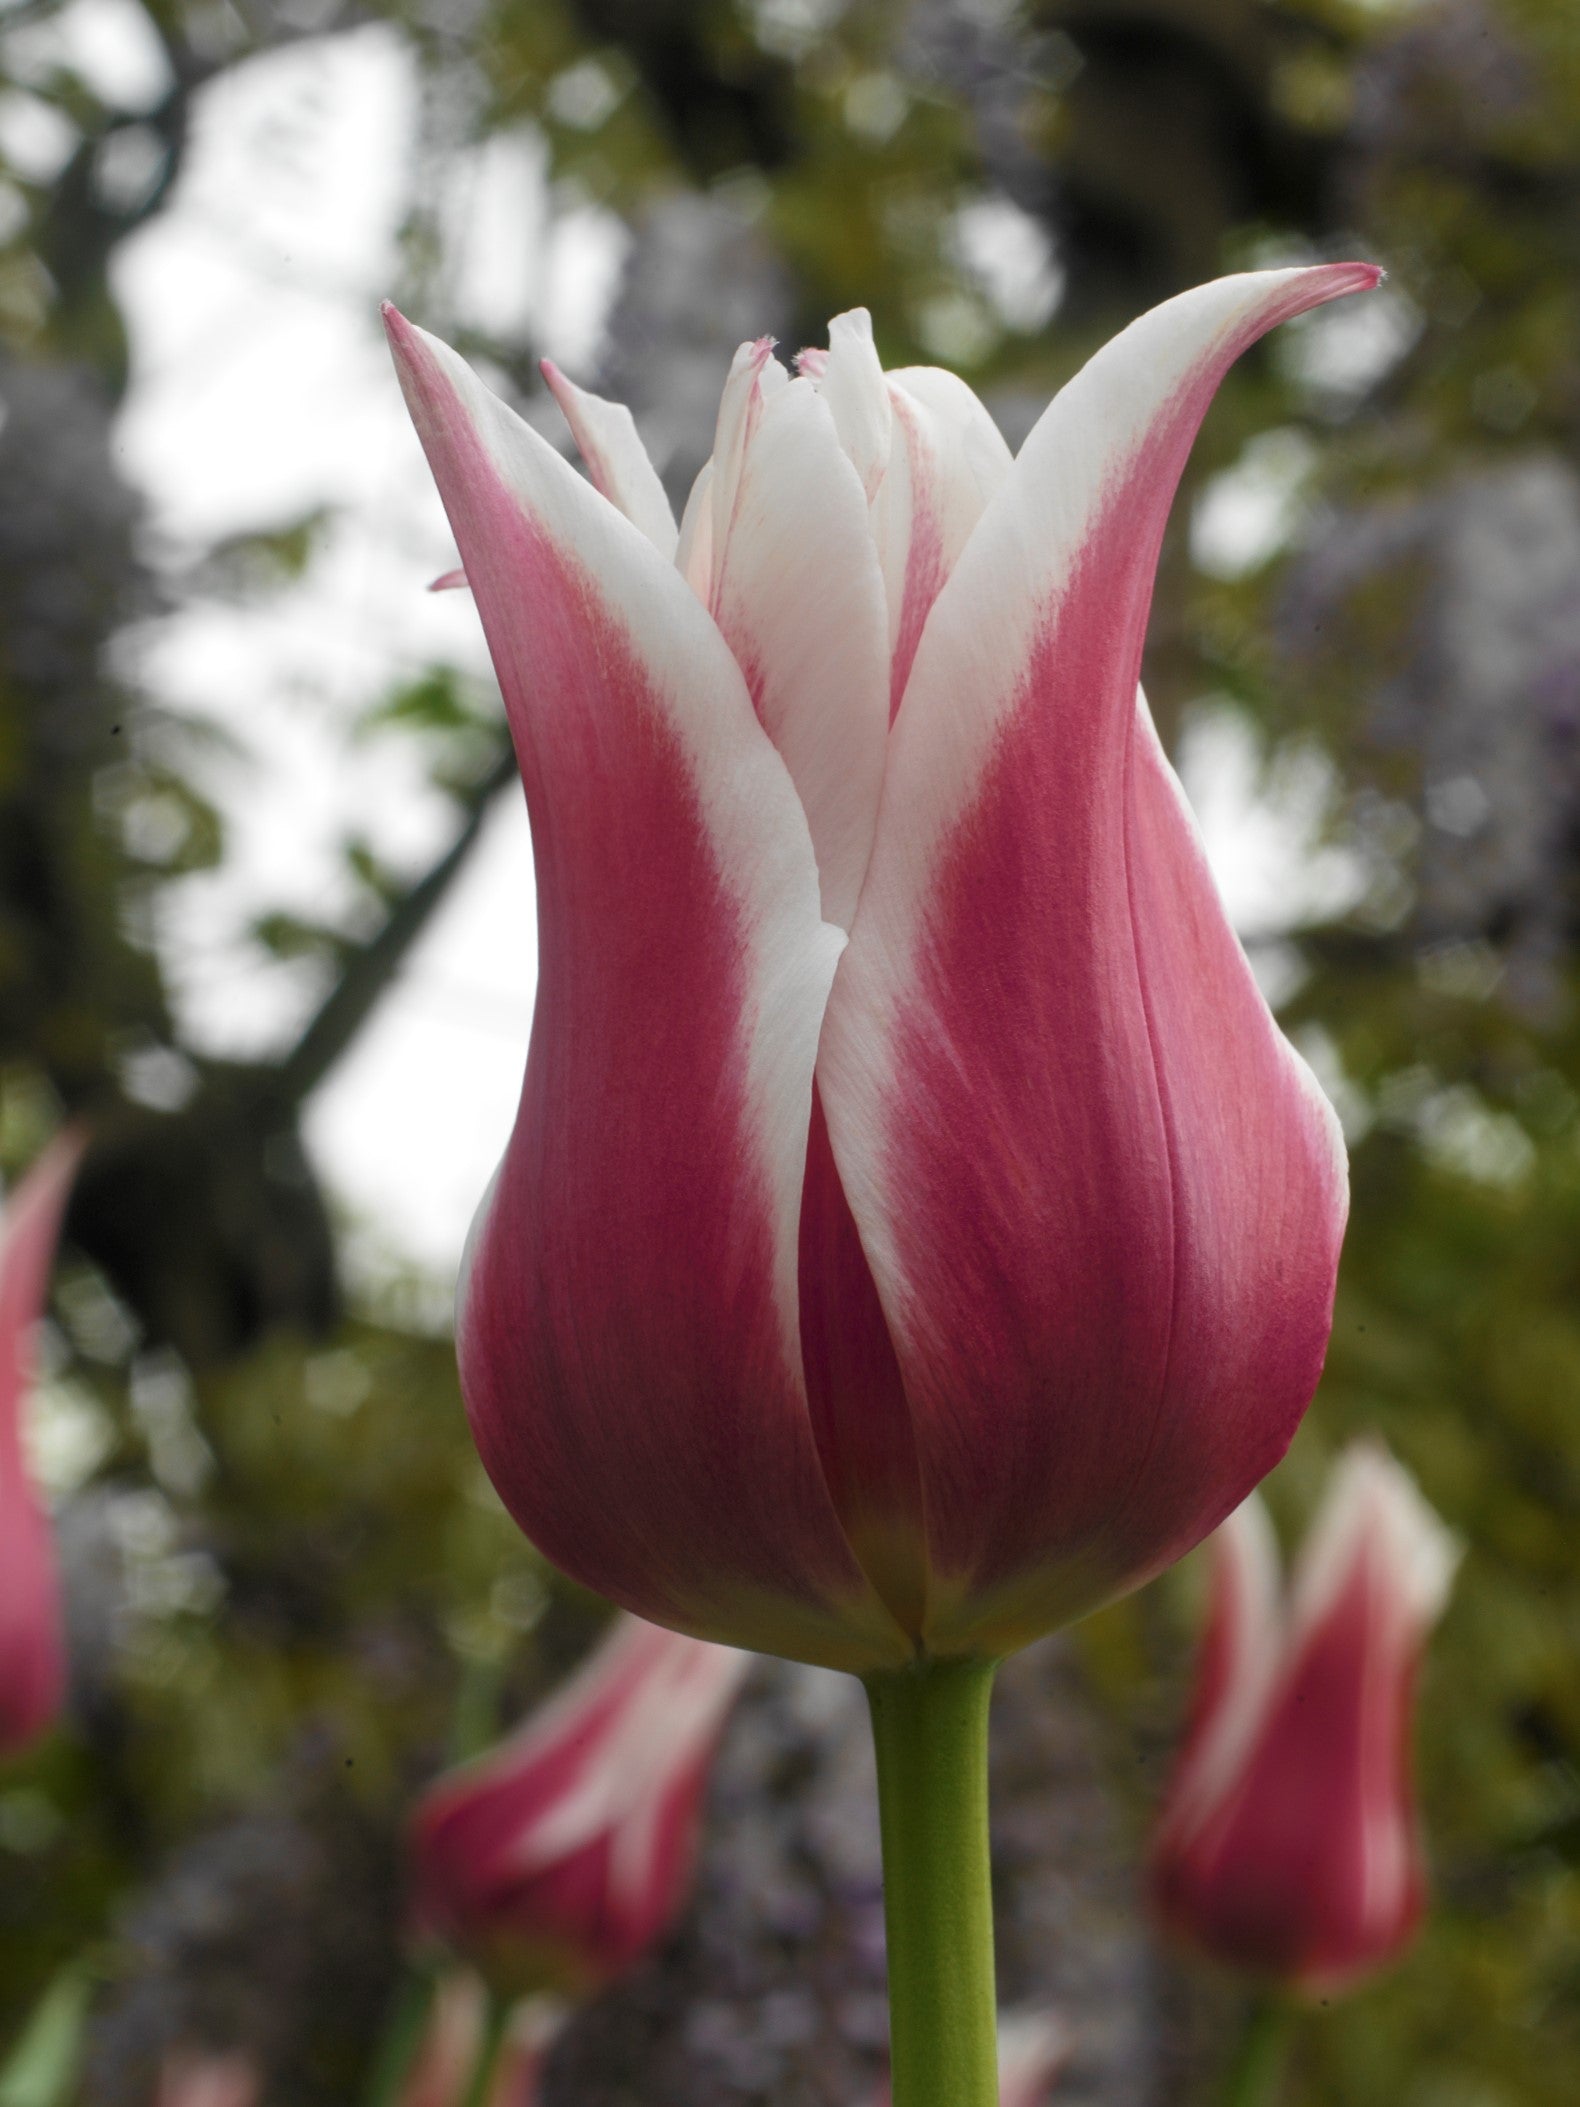 A close-up of a vibrant purple and white Lily flowering Ballade tulip